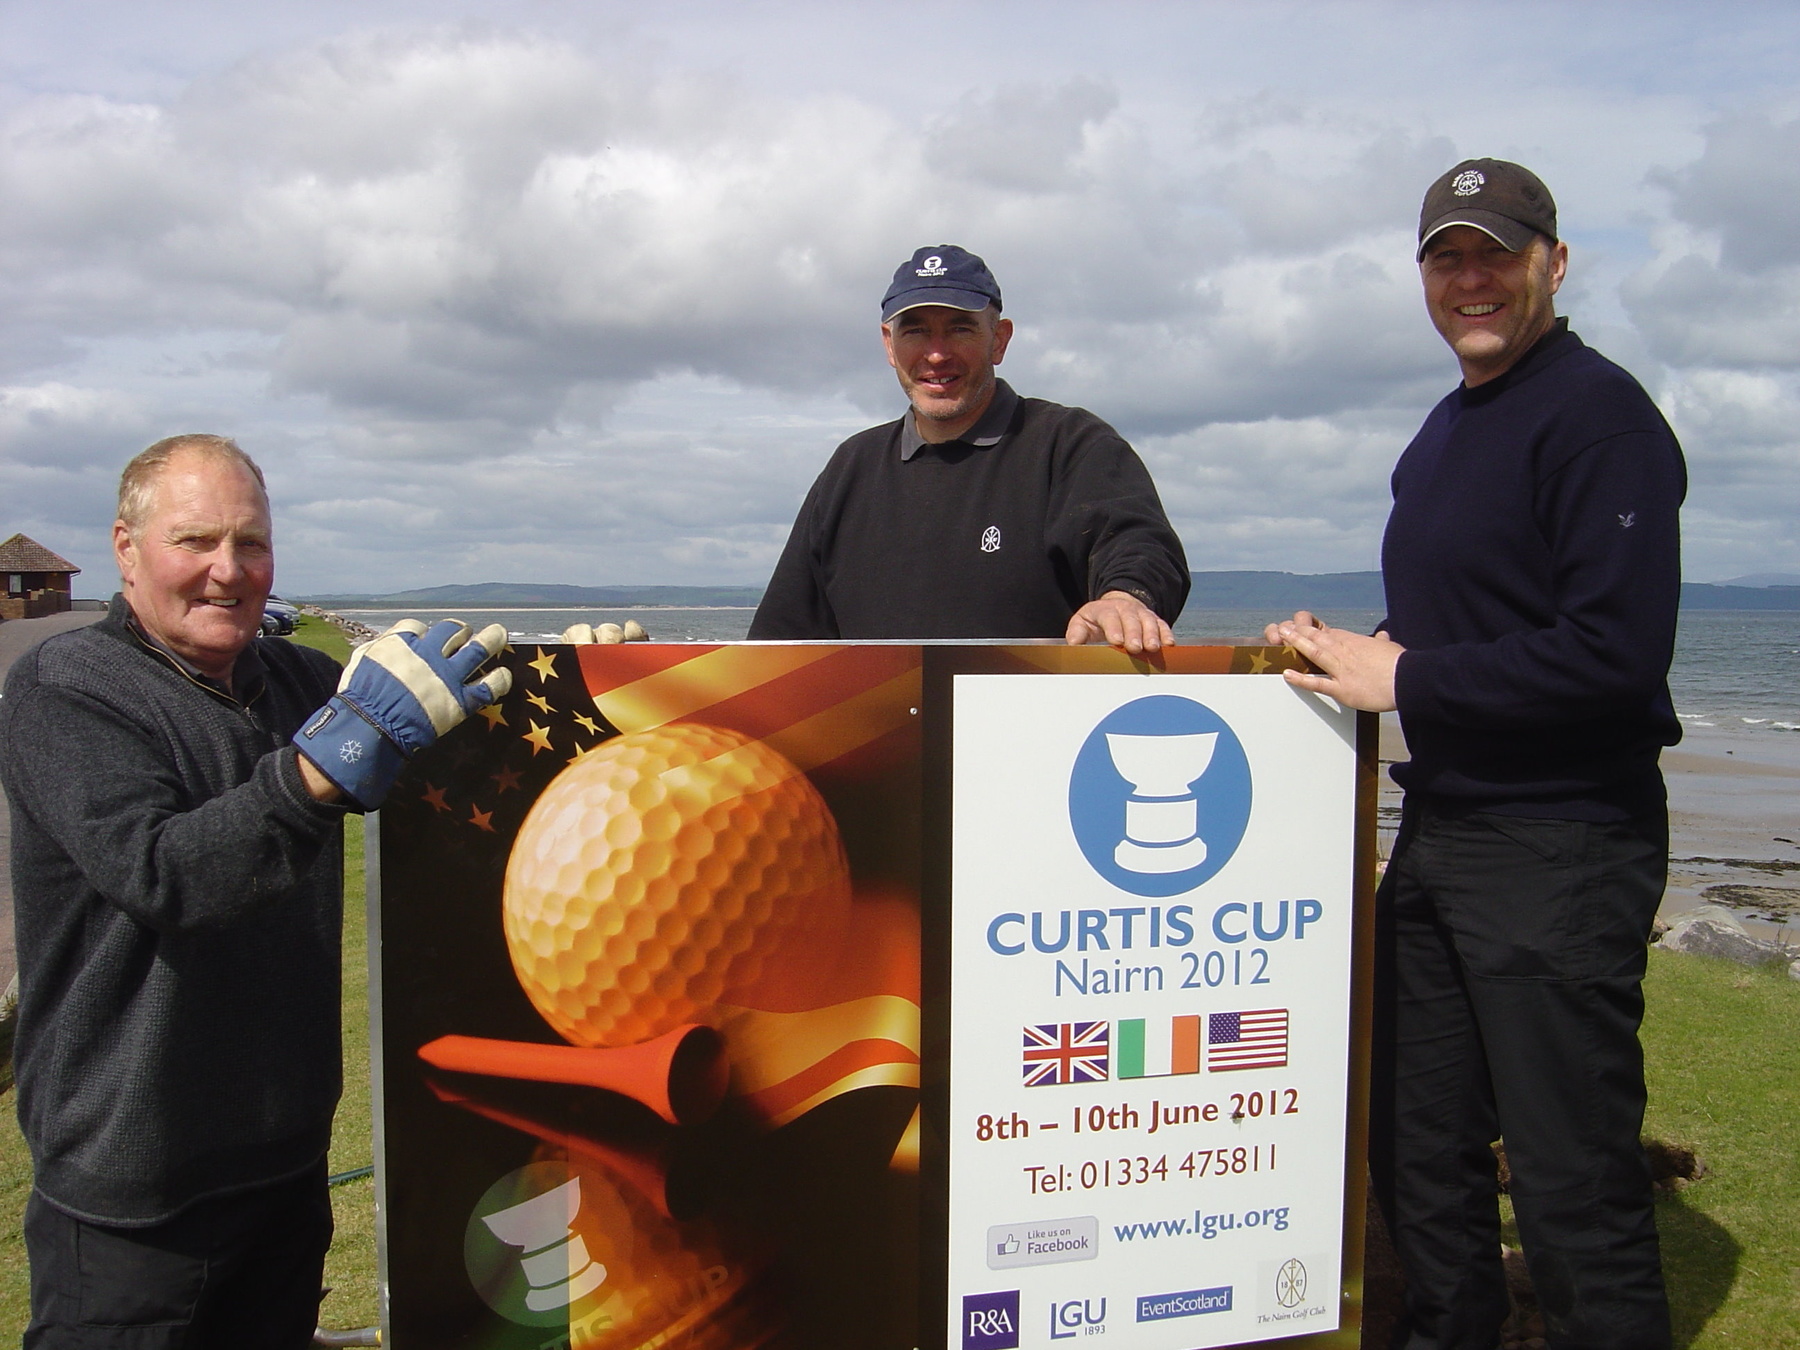 Nairn Curtis Cup Sign May 2011mod